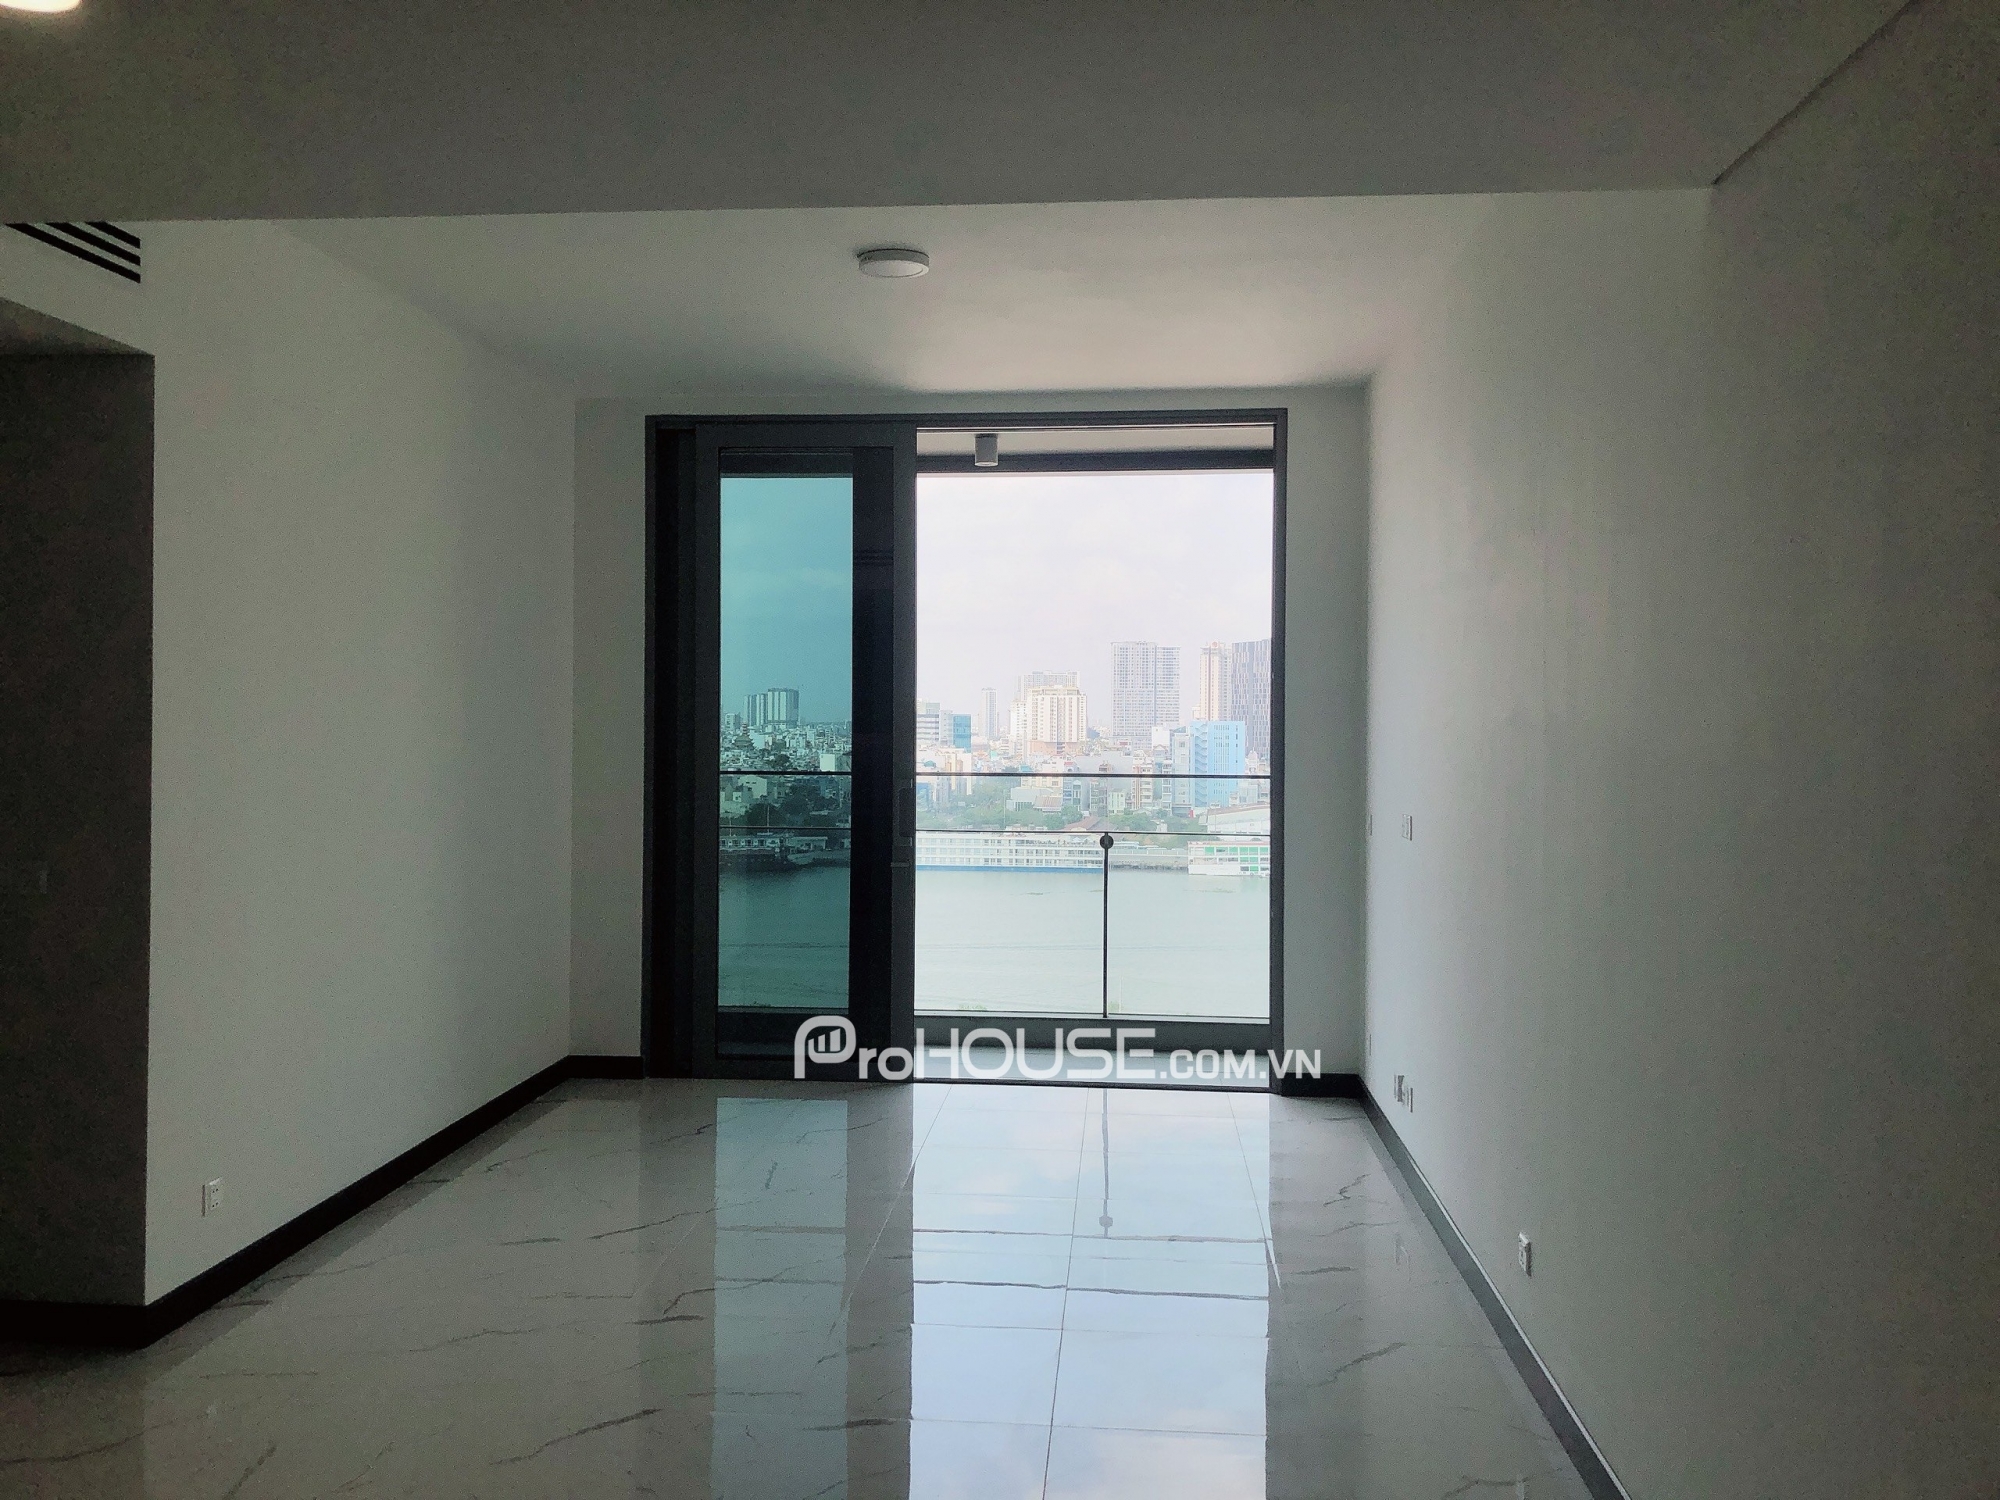 River view apartment for rent in Empire City Tilia tower with 2 bedrooms